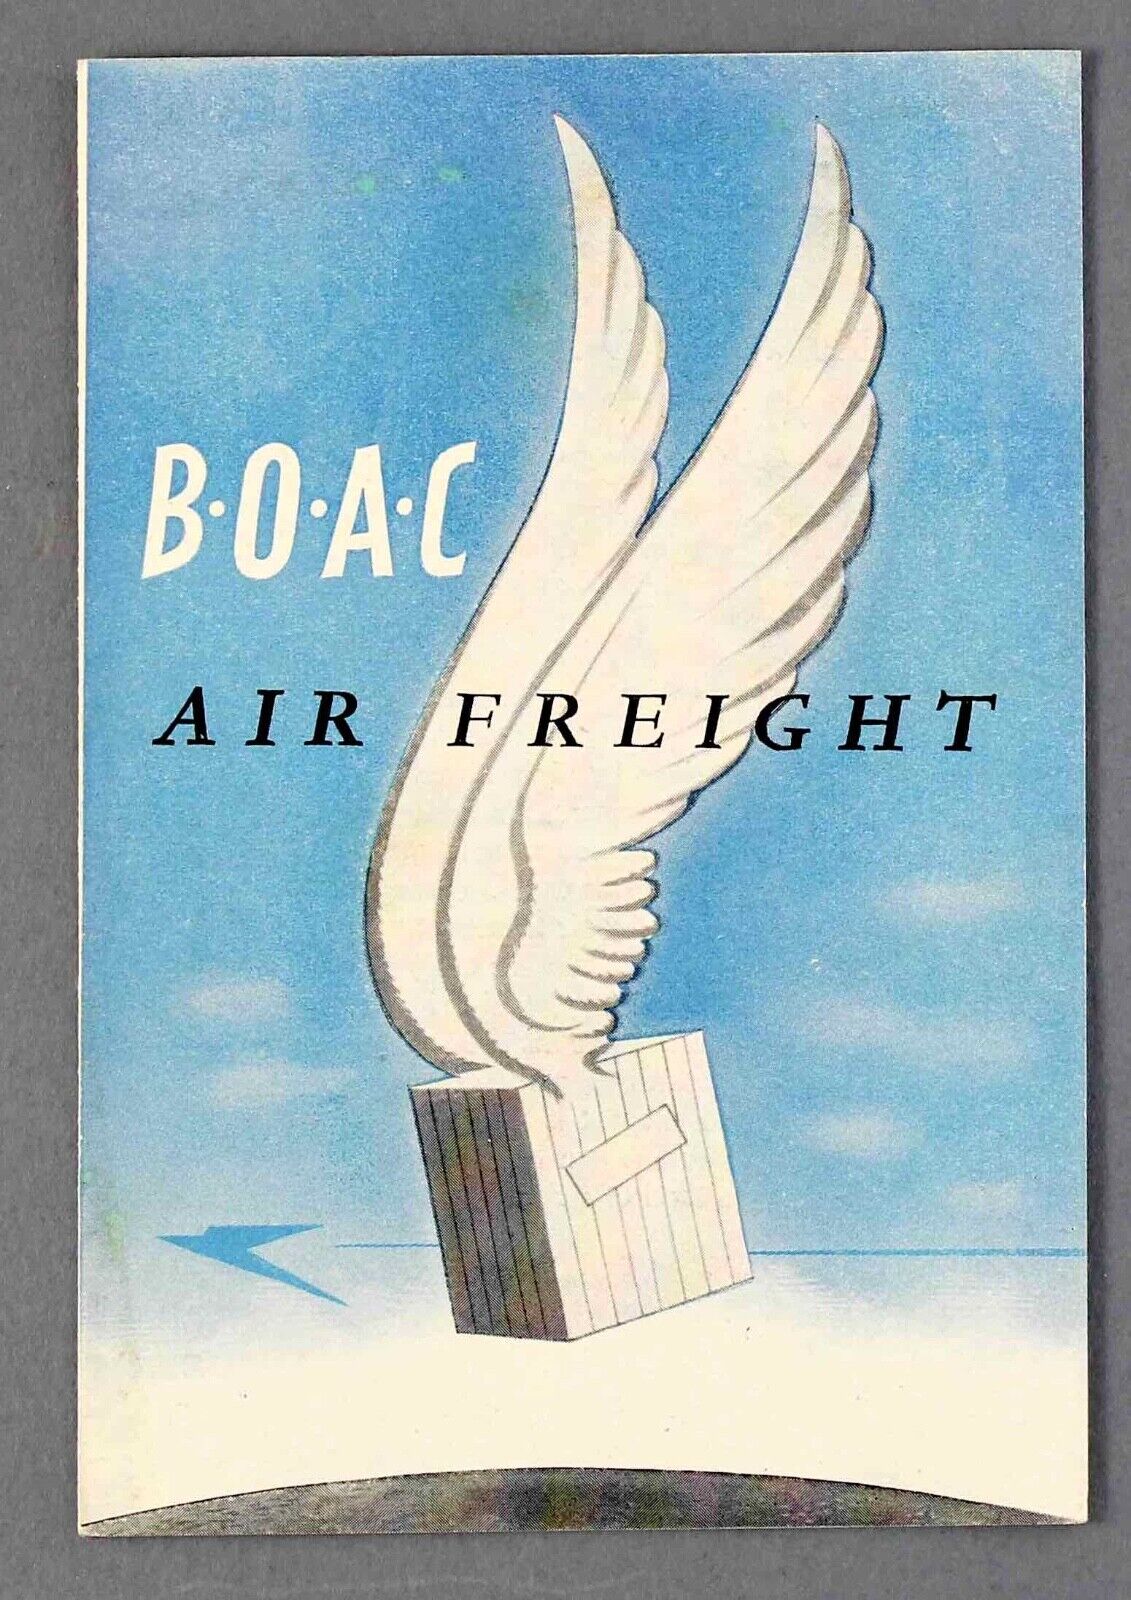 BOAC AIR FREIGHT VINTAGE AIRLINE BROCHURE 1949 B.O.A.C.CARGO 